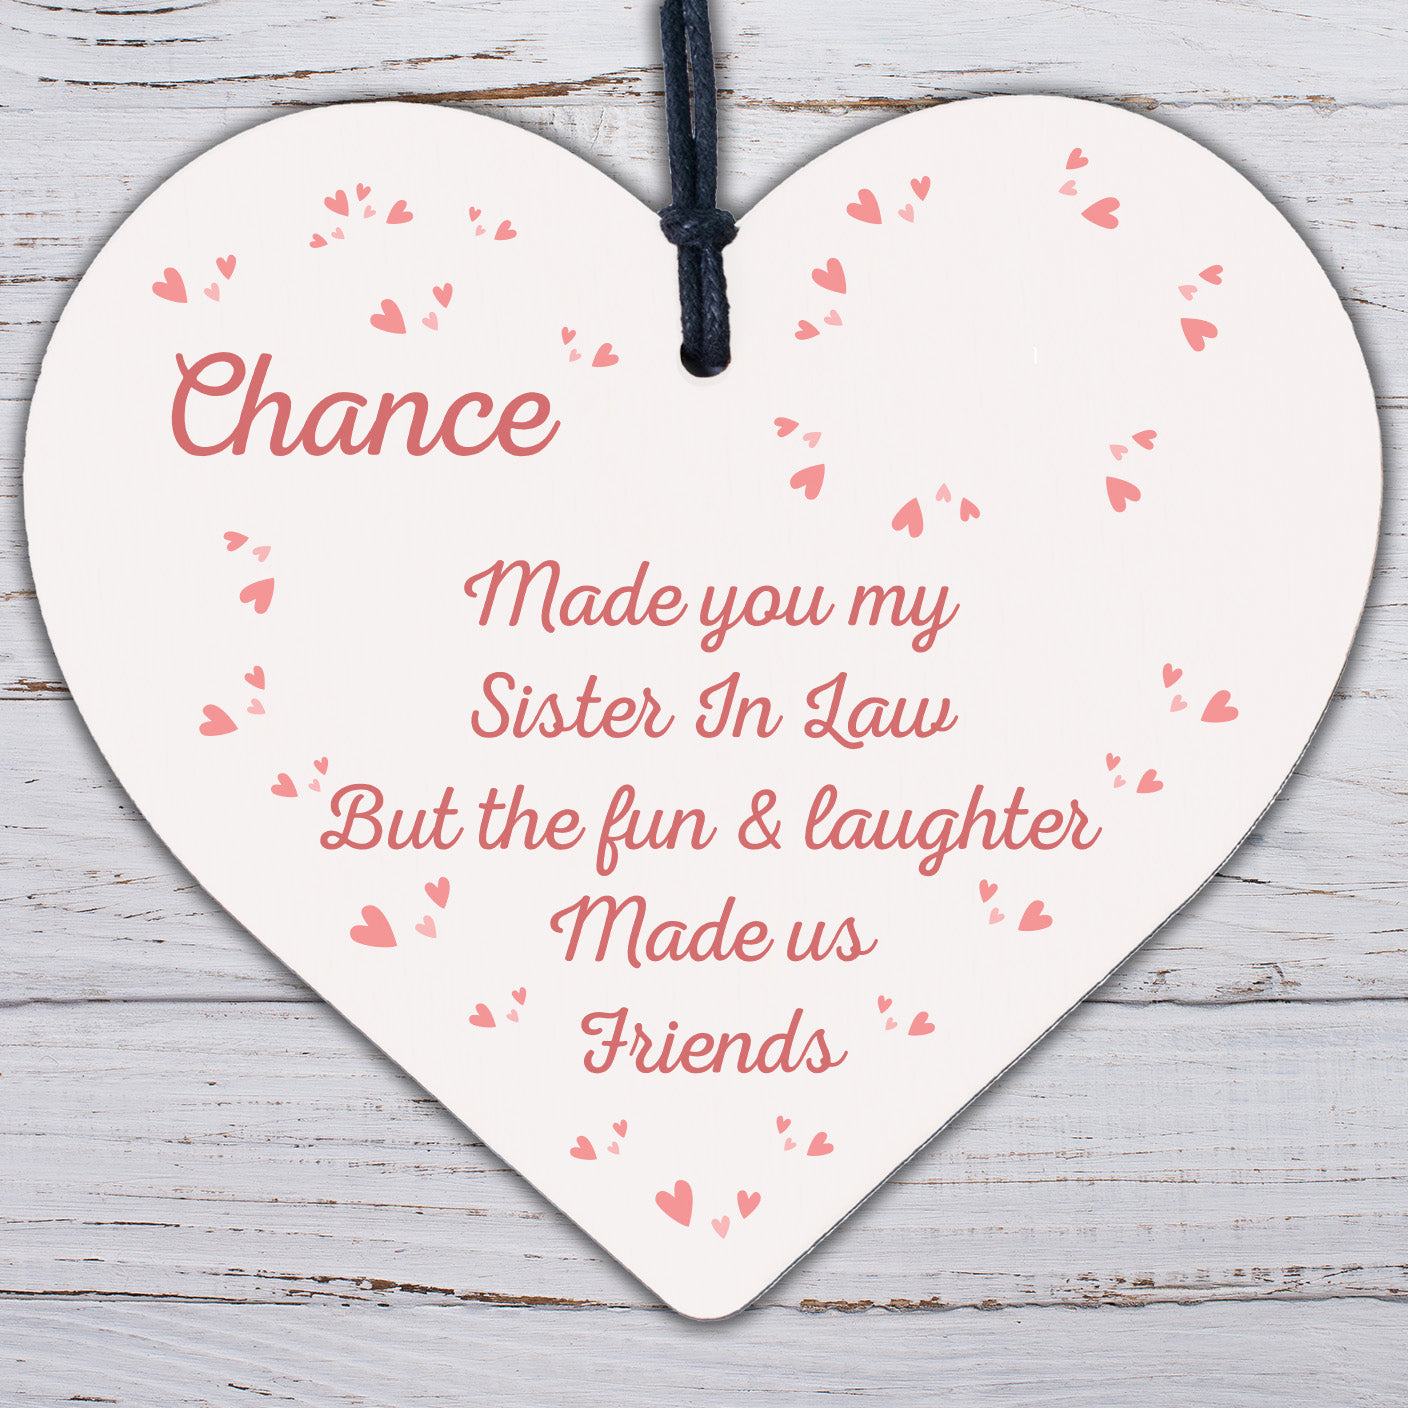 Chance Made You My Sister In Law Wooden Heart Plaque Keepsake Friendship Gift